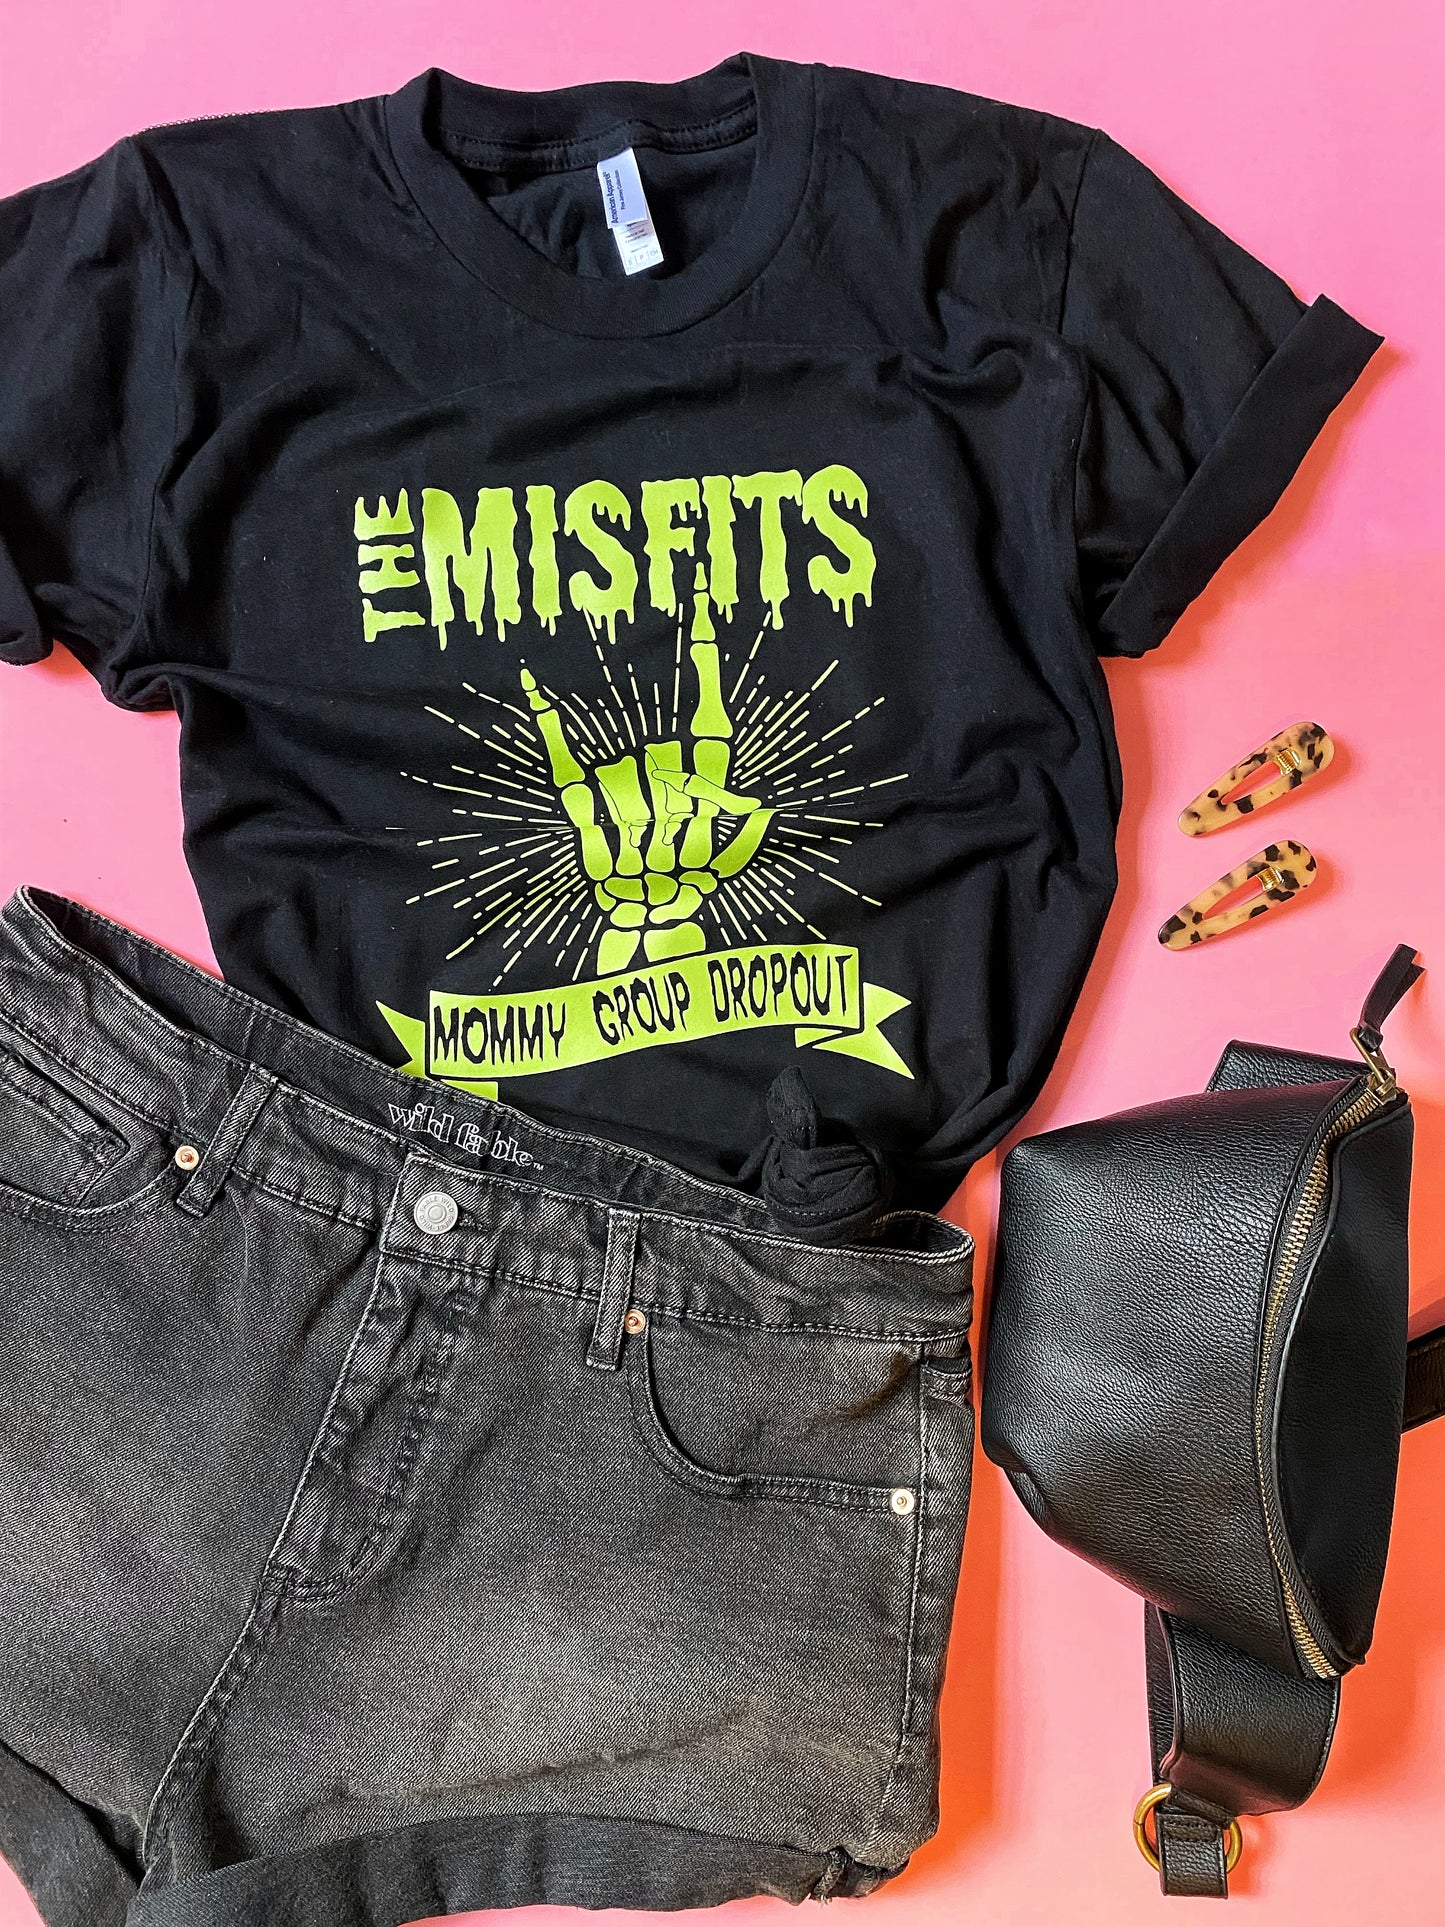 MISFITS - Mommy group dropout - black tee